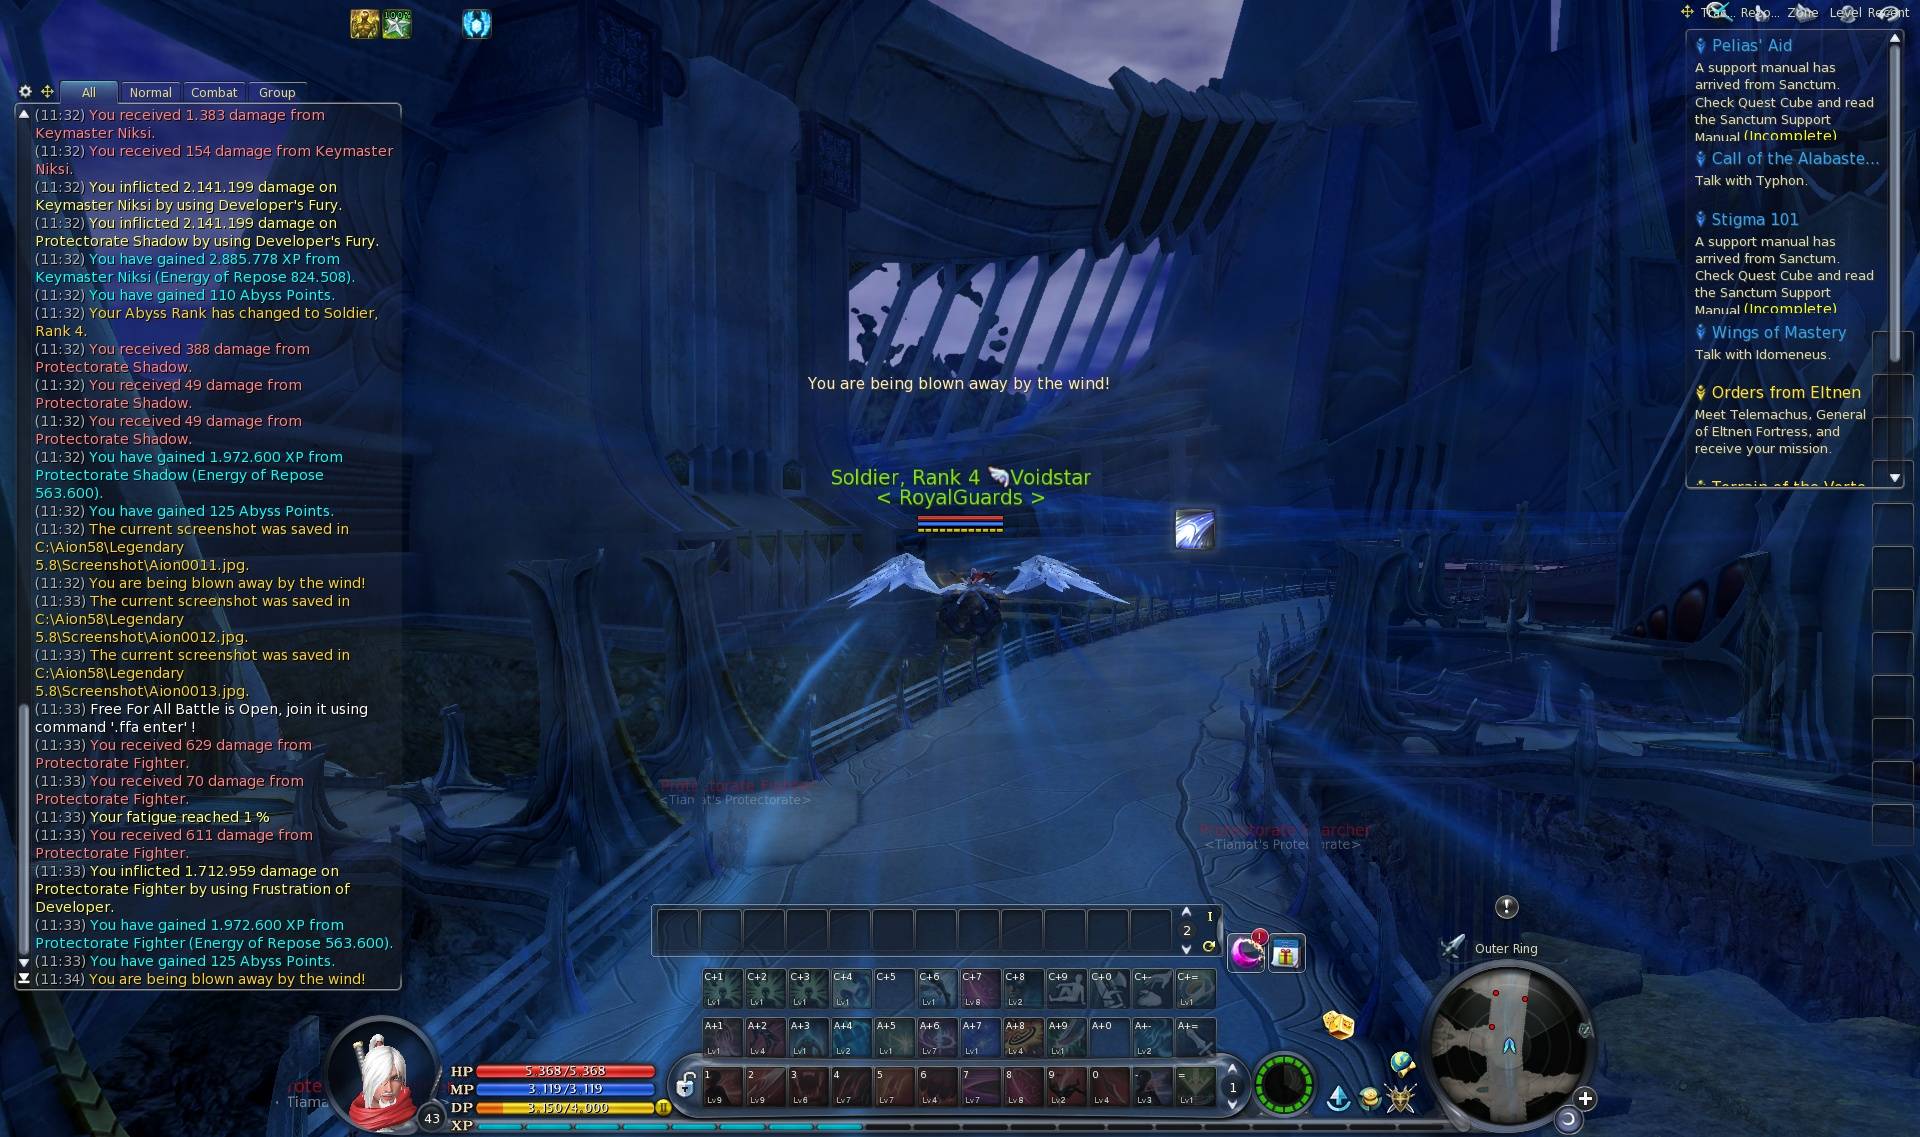 Aion0014 - What's your favorite version of Aion to play, and why? - RaGEZONE Forums